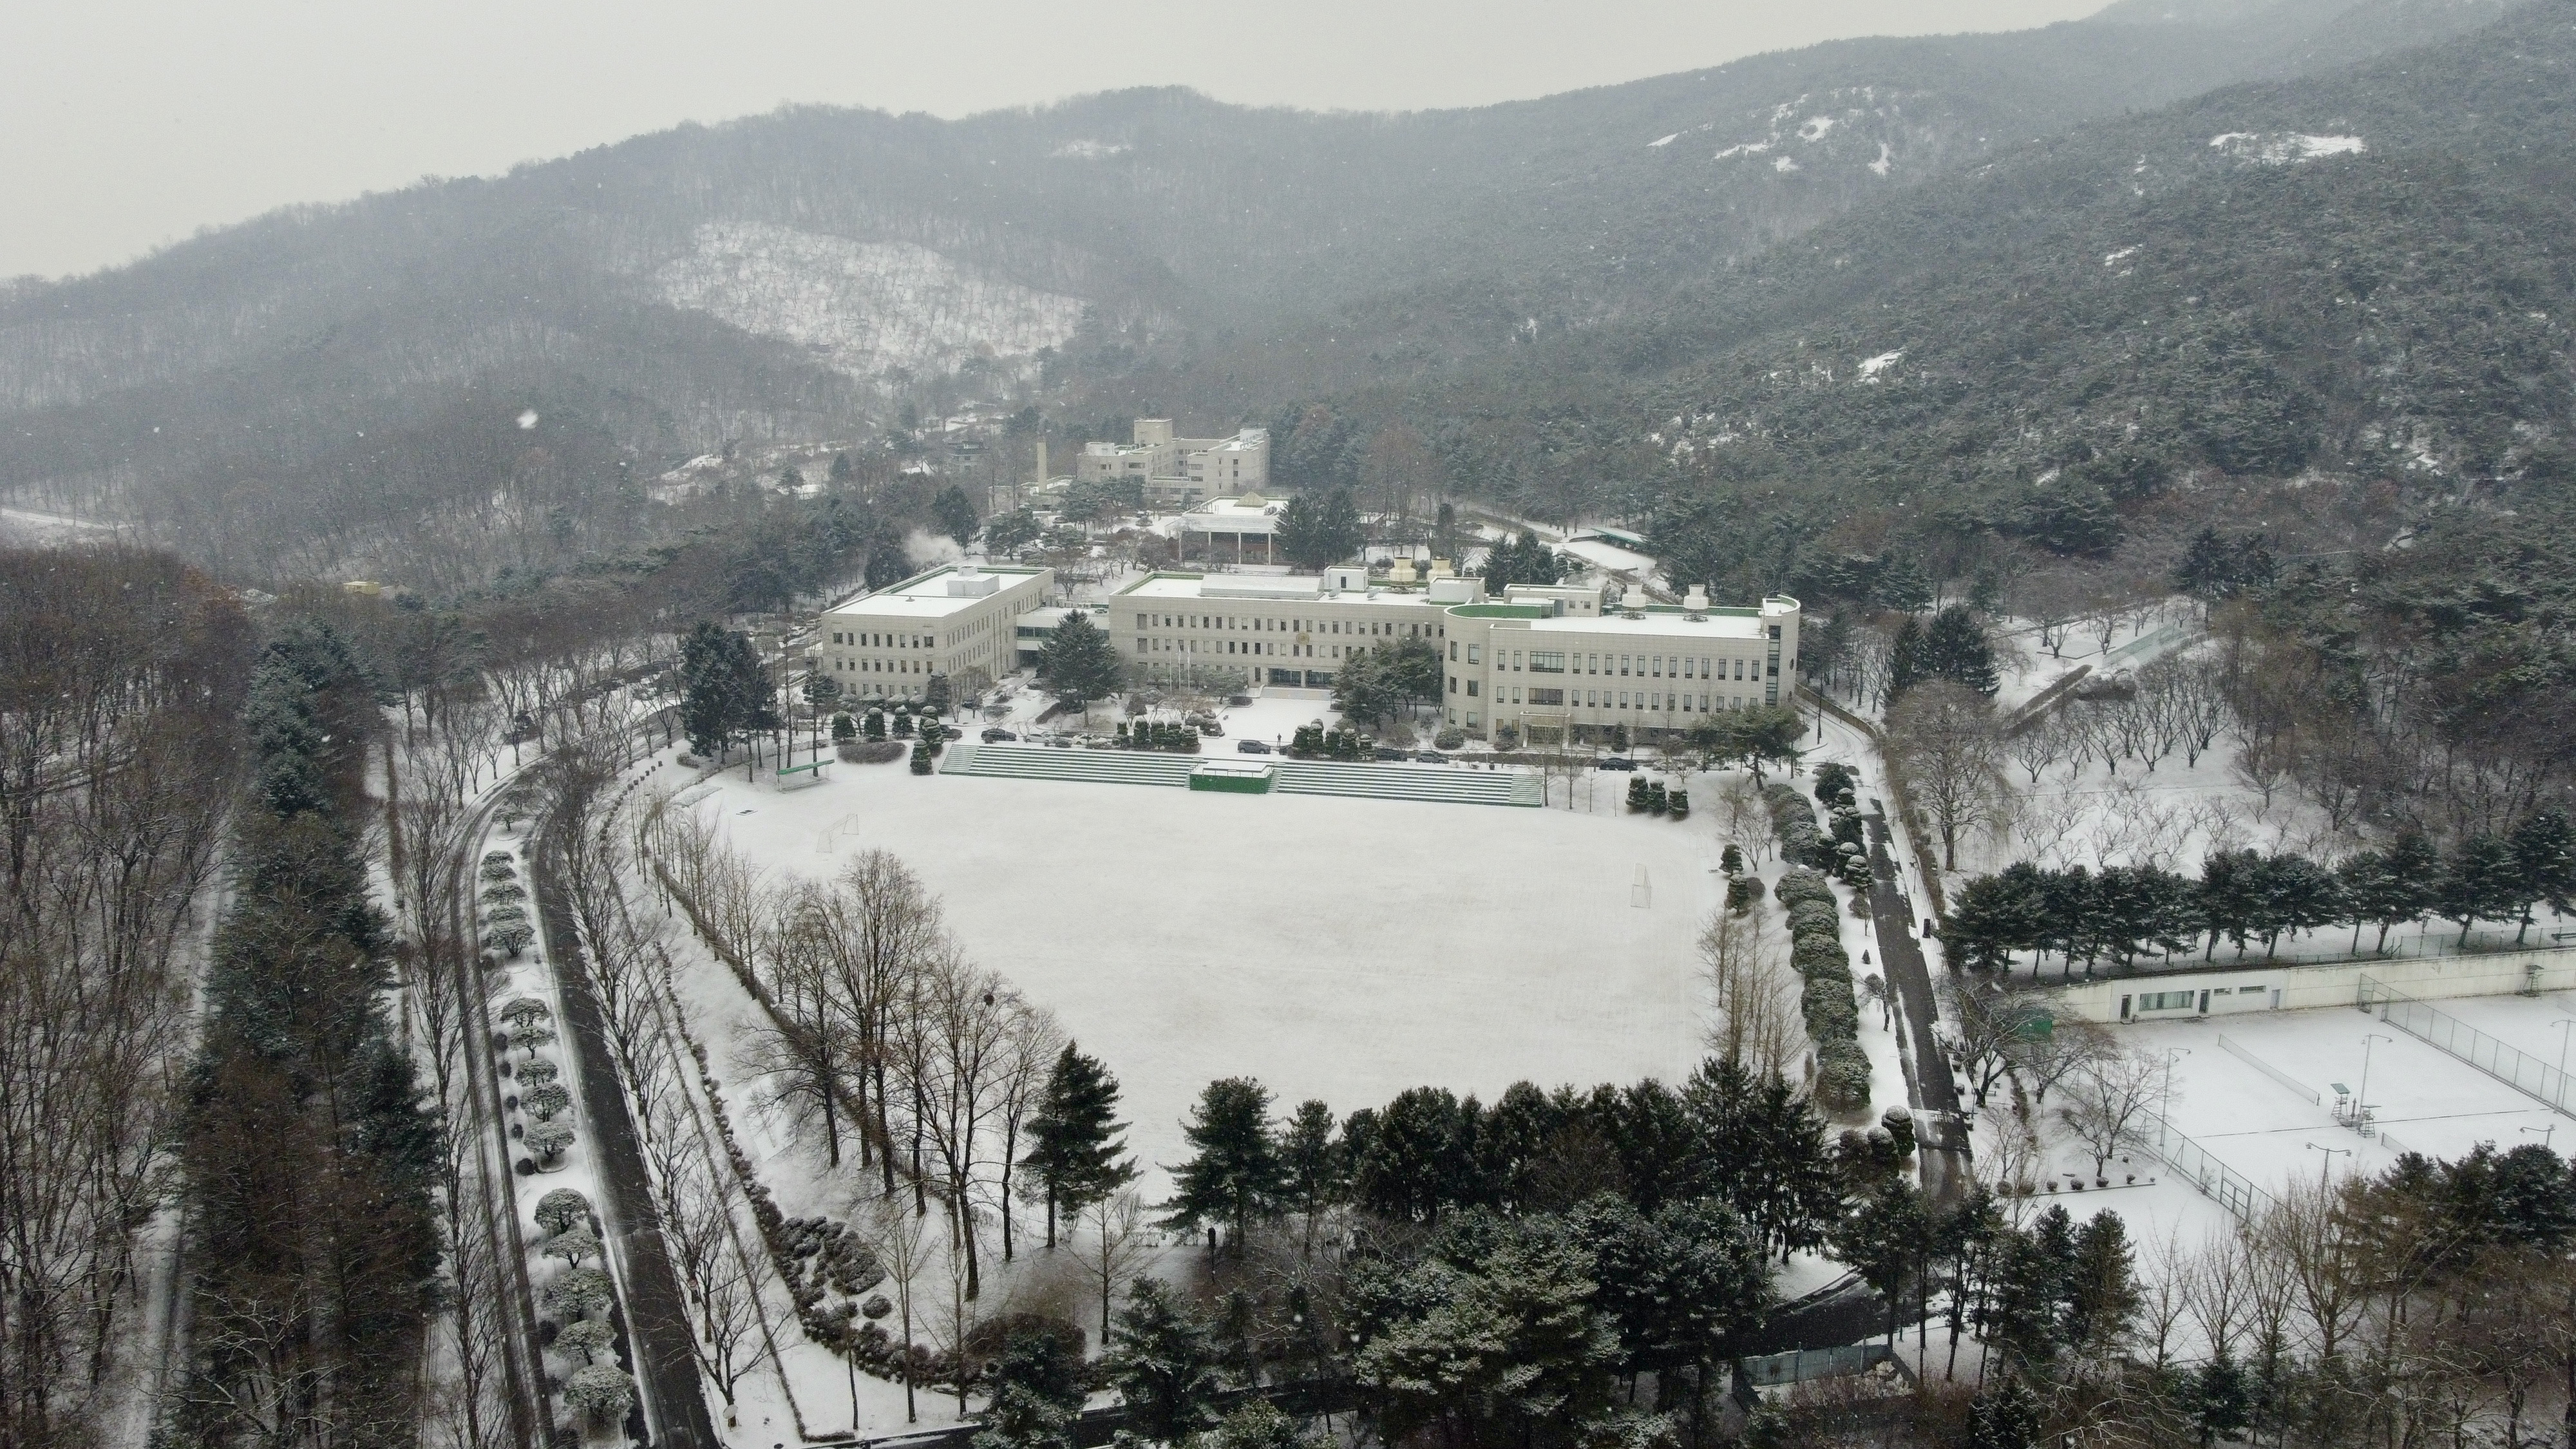 NHI is covered by snow today. Wish everyone is enjoying the amazing view of NHI while snowing.